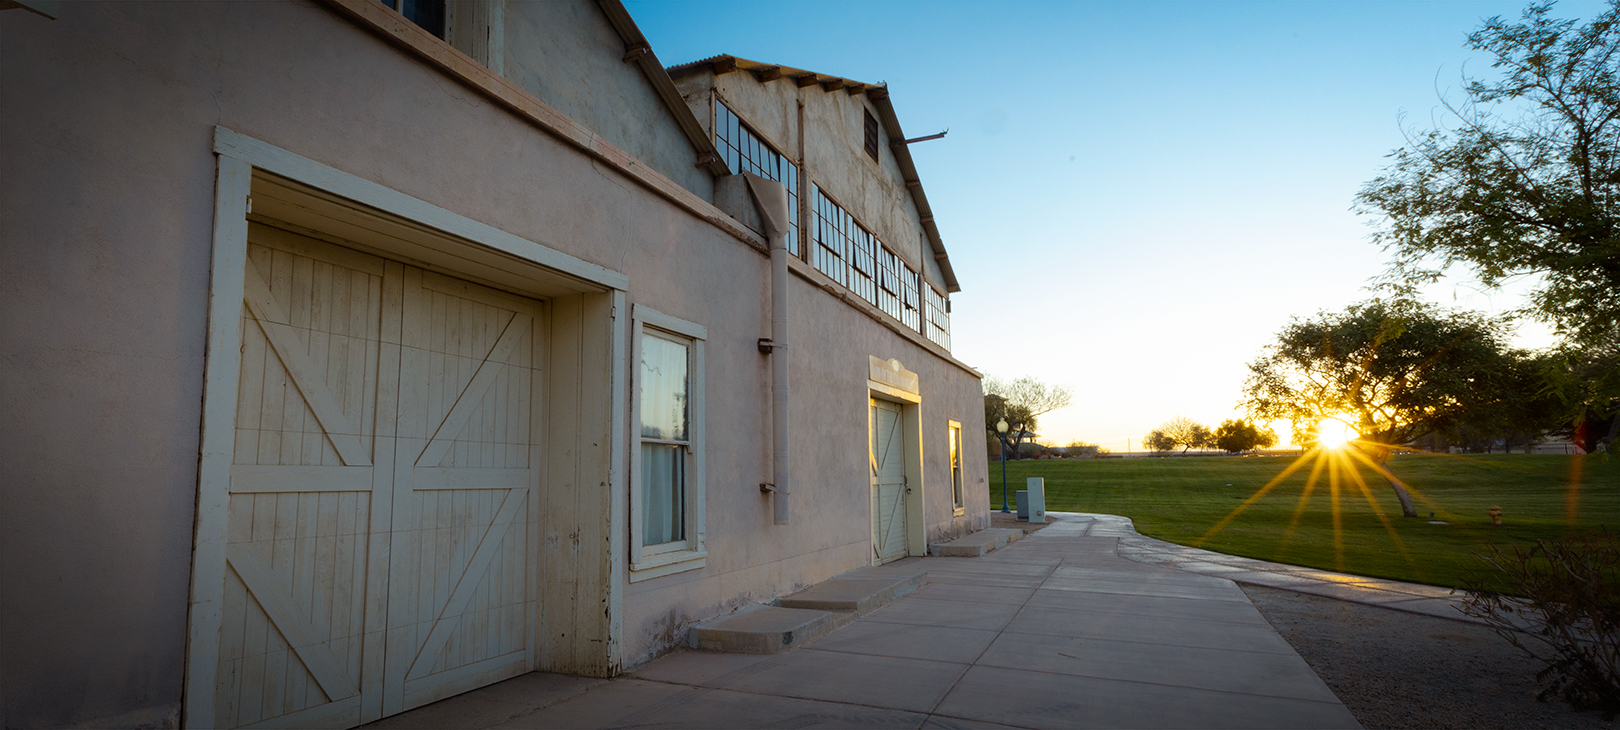 One of the historic buildings at Colorado River State Historic Park